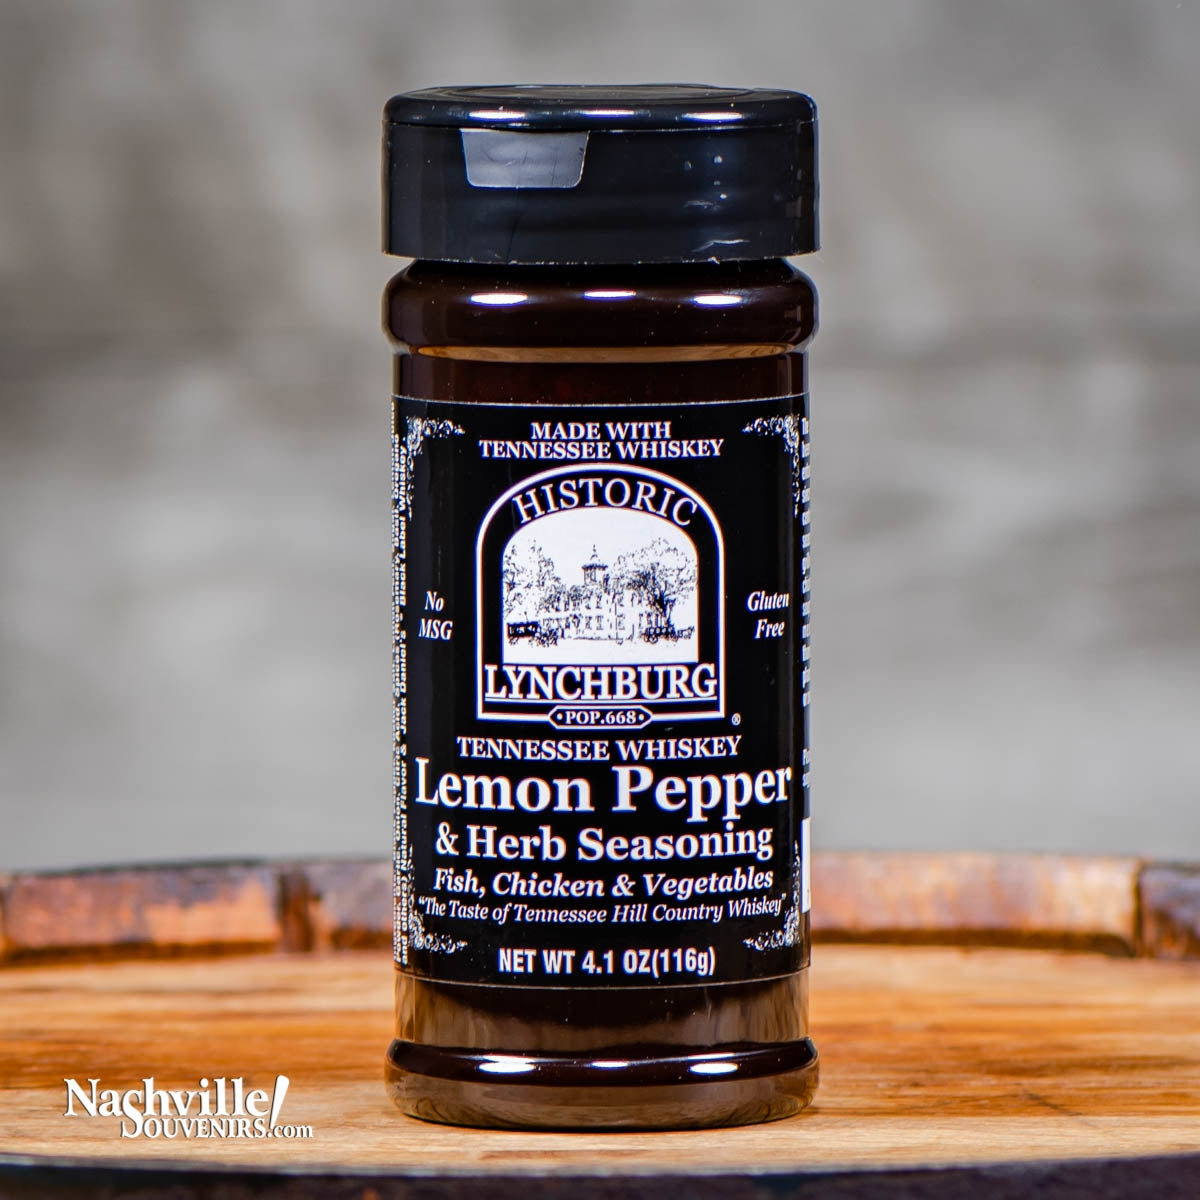 Buy Historic Lynchburg Tennessee Whiskey Lemon Pepper containing real Jack Daniels Tennessee whiskey.  FREE SHIPPING on all US orders over $75!